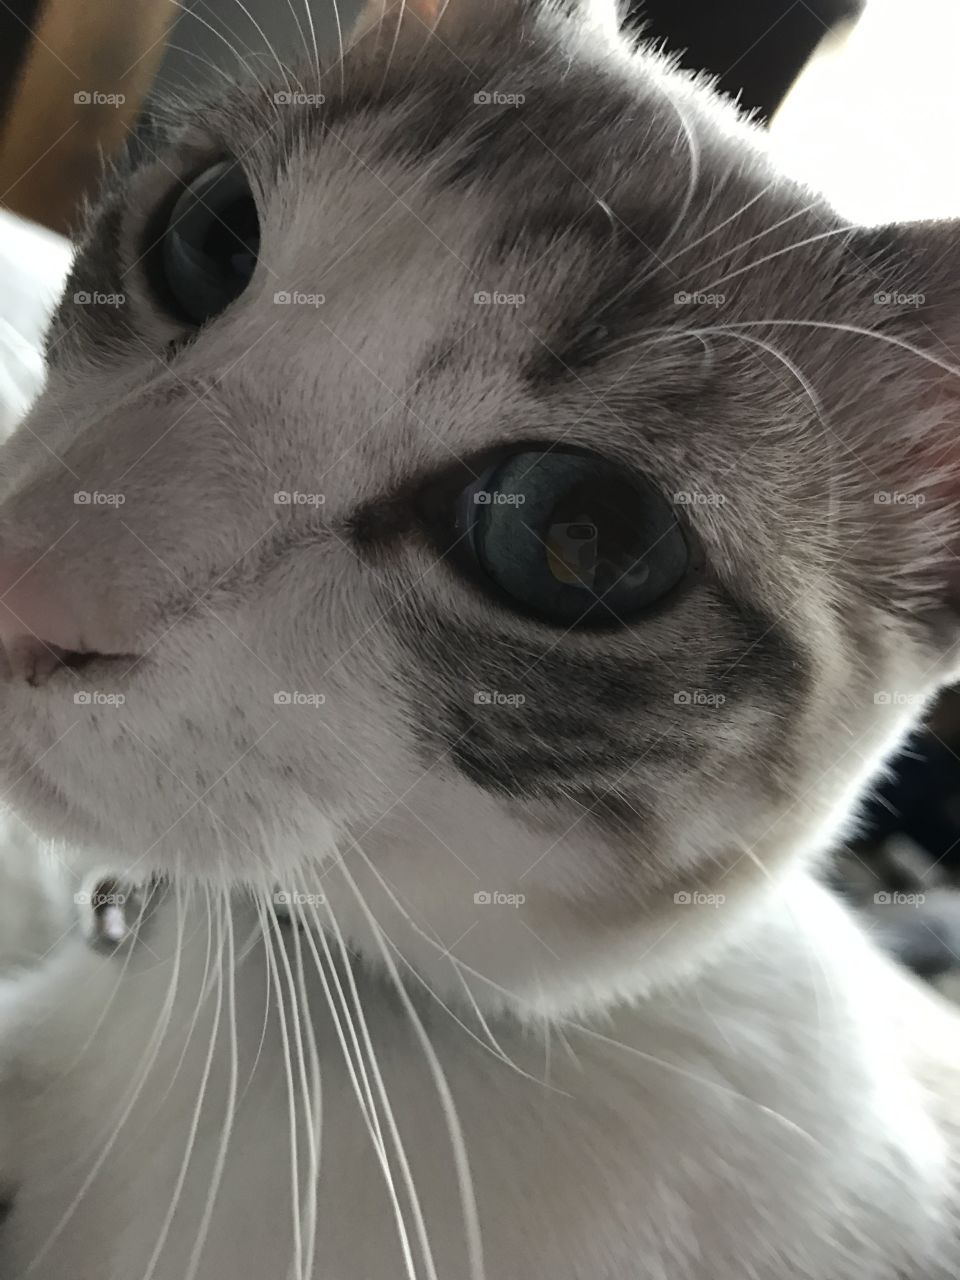 White cat face - phone reflected in eye